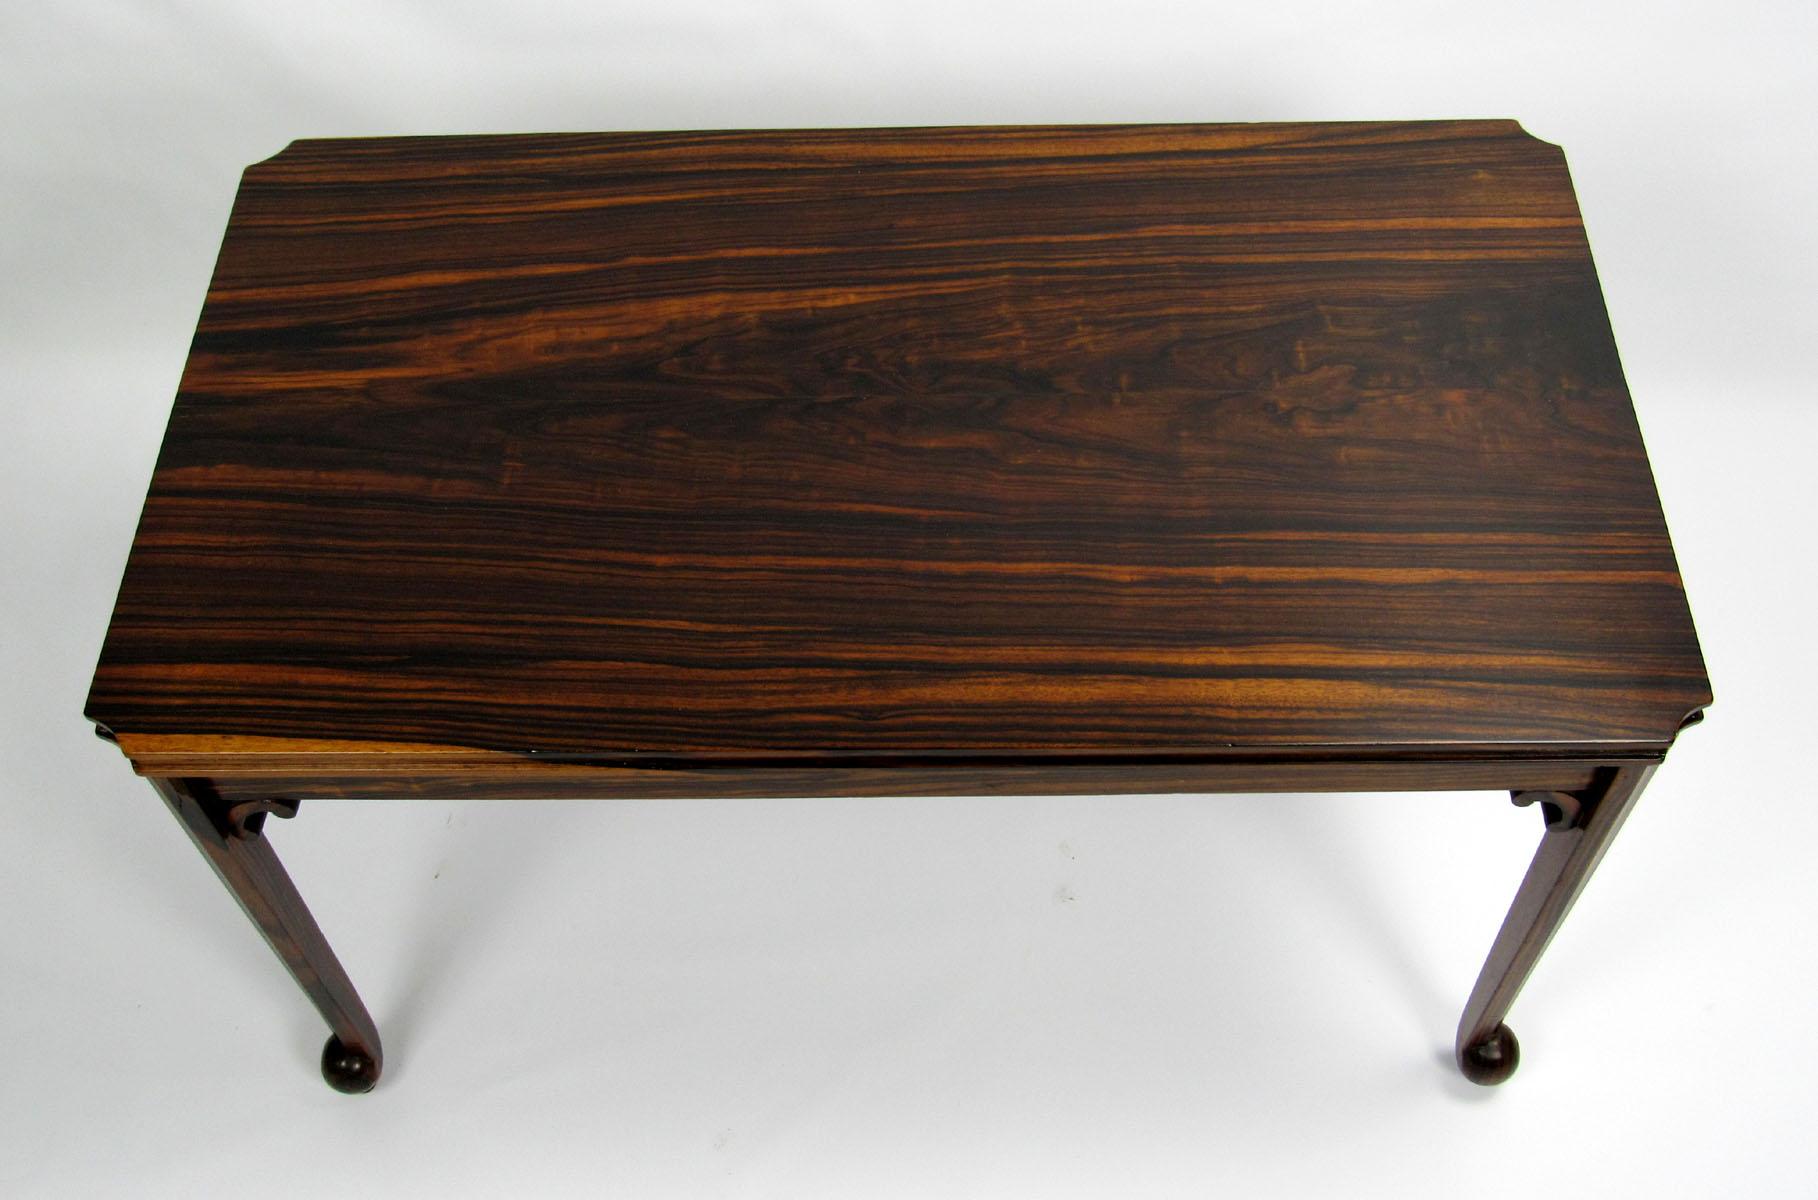 Early 20th century cocktail table from England made from exotic woods, purchased from JF Chen.